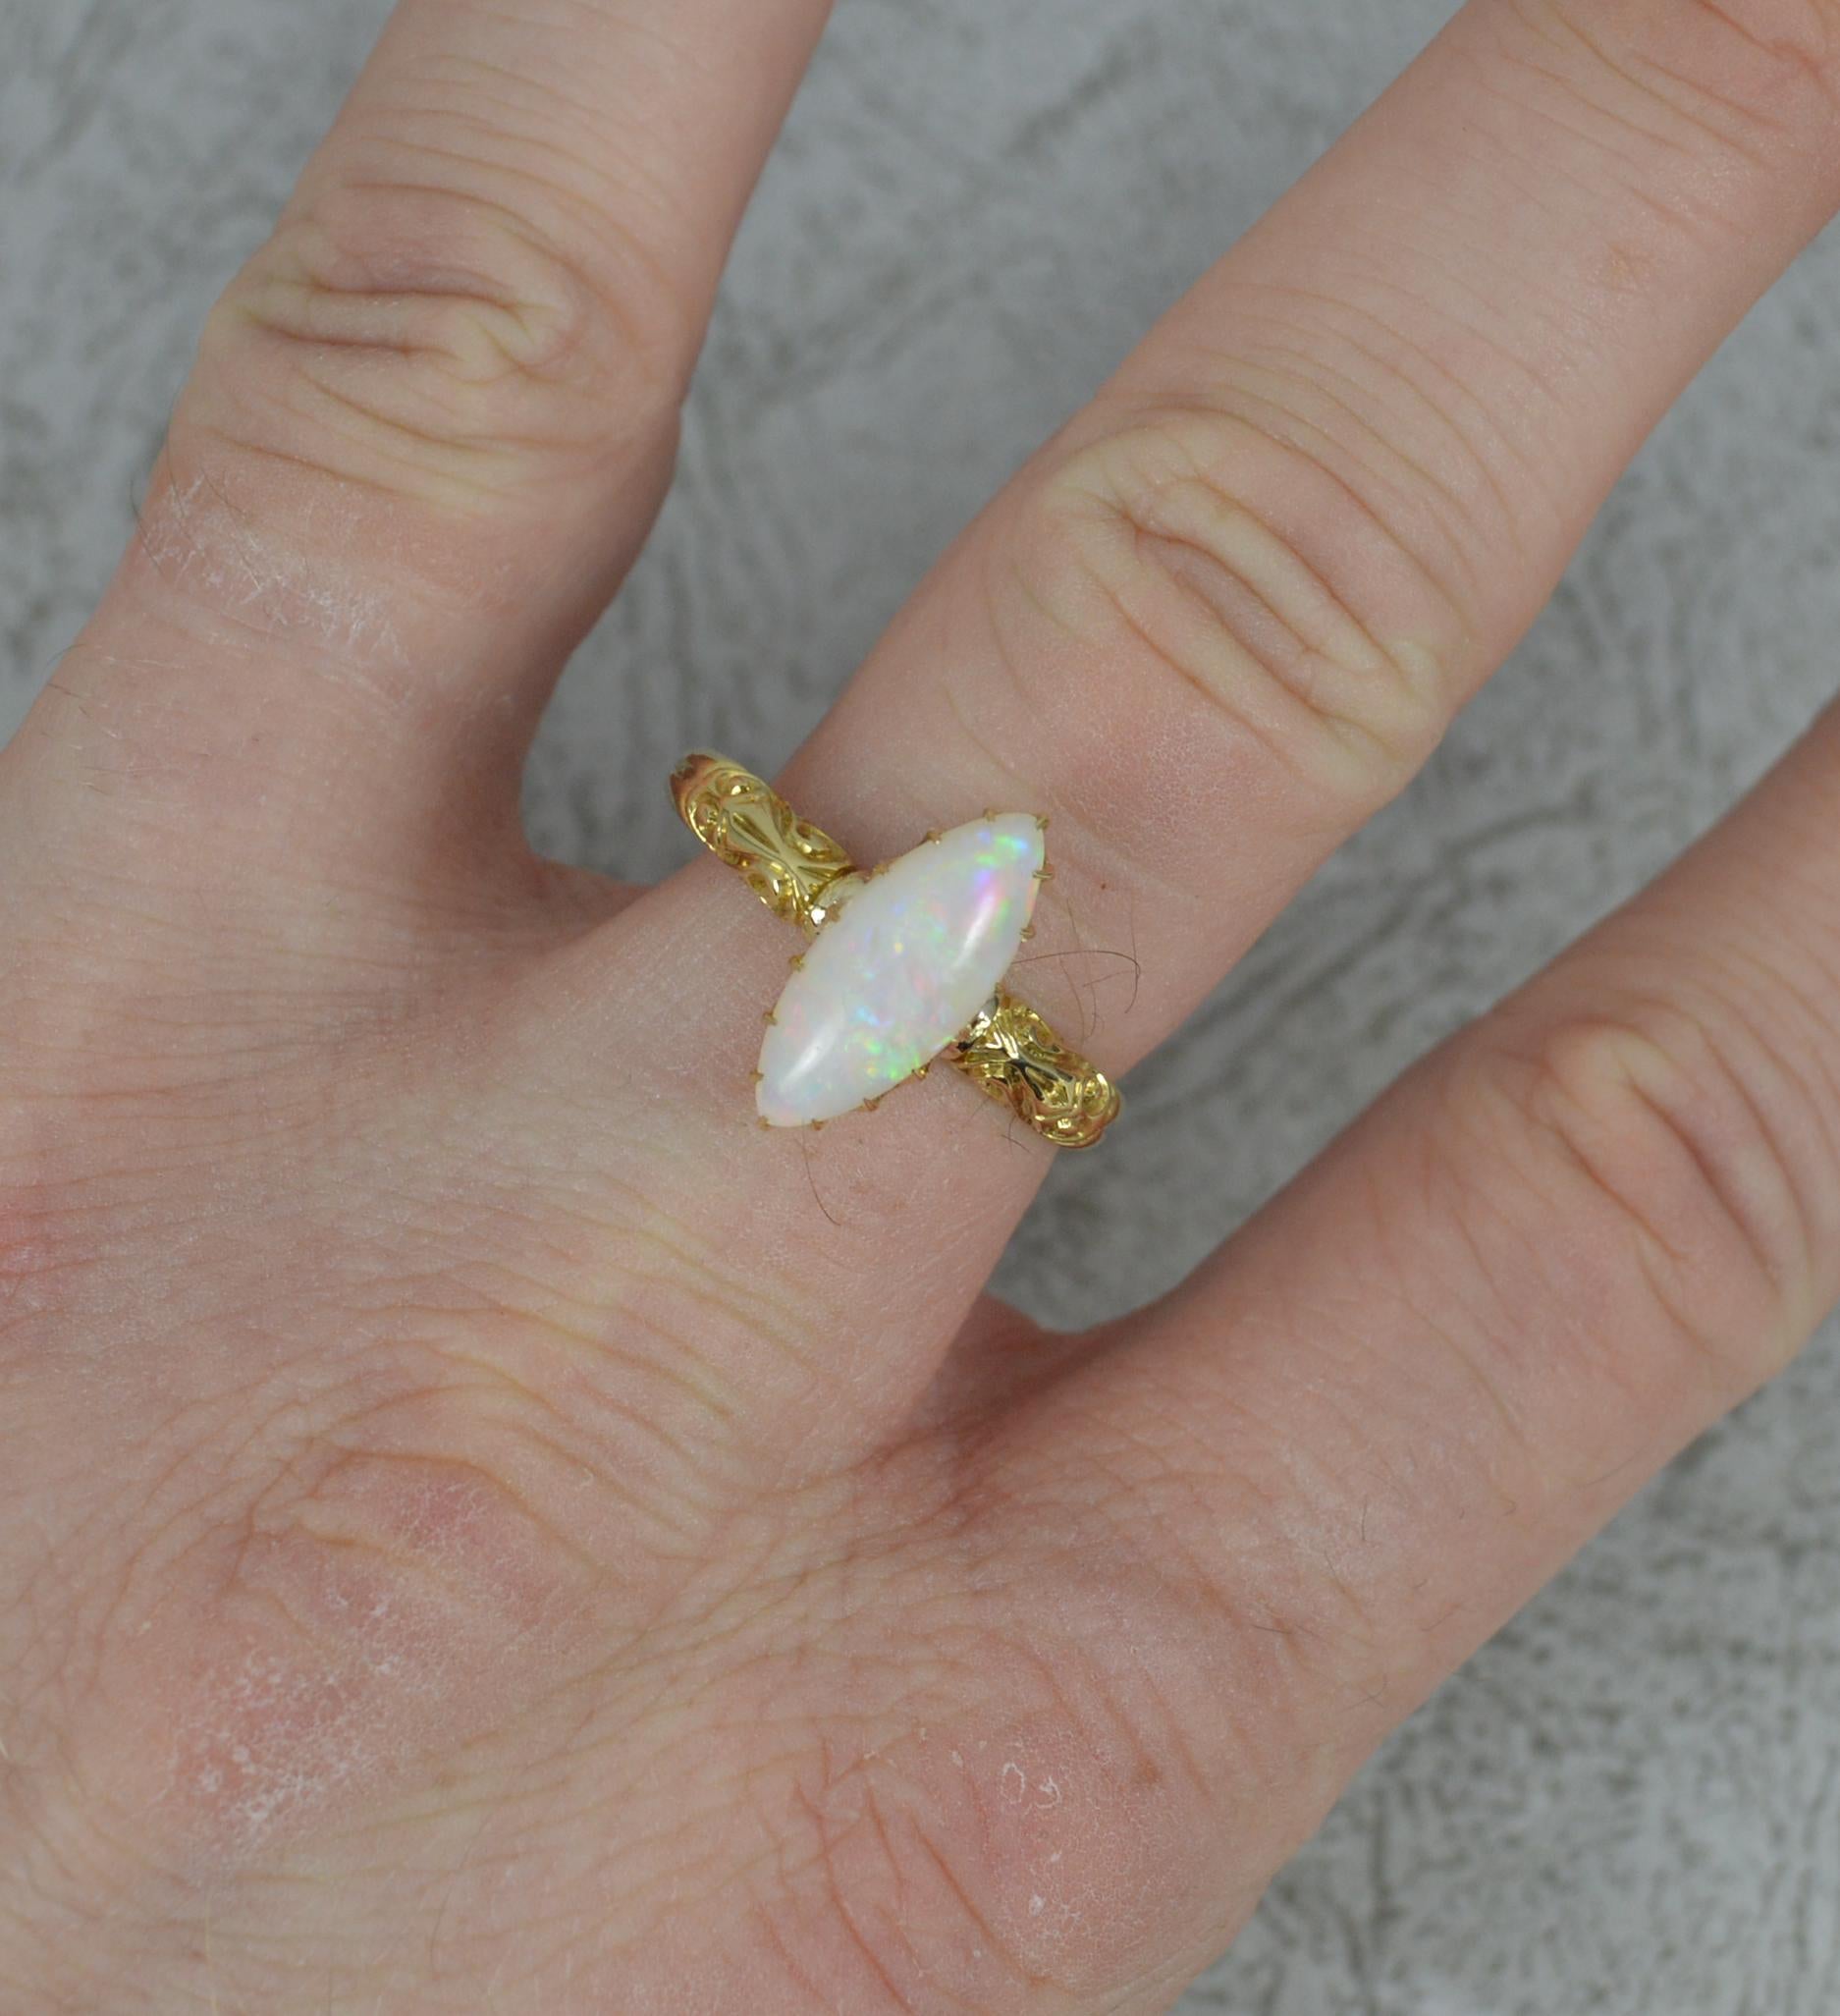 A stunning Opal solitaire ring from c1890.
Solid 18 carat yellow gold shank with scroll pattern to shoulders.
Designed with a natural, marquise shaped opal in a multi claw setting.
6mm x 14.5mm opal. Natural. Good display of colour.

CONDITION ;